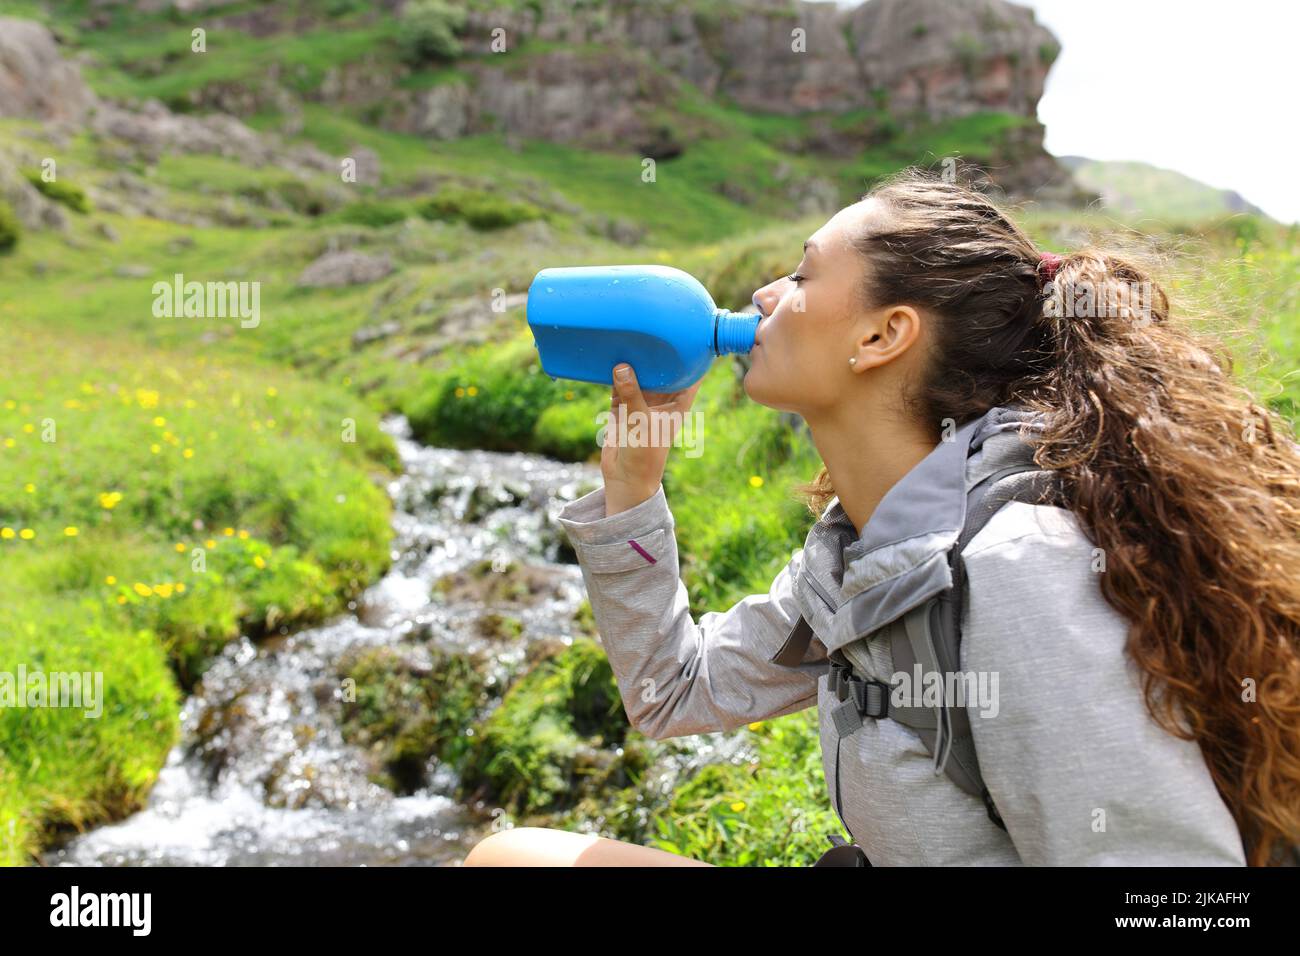 Side view portrait of a hiker drinking water from canteen in a mountain crew Stock Photo